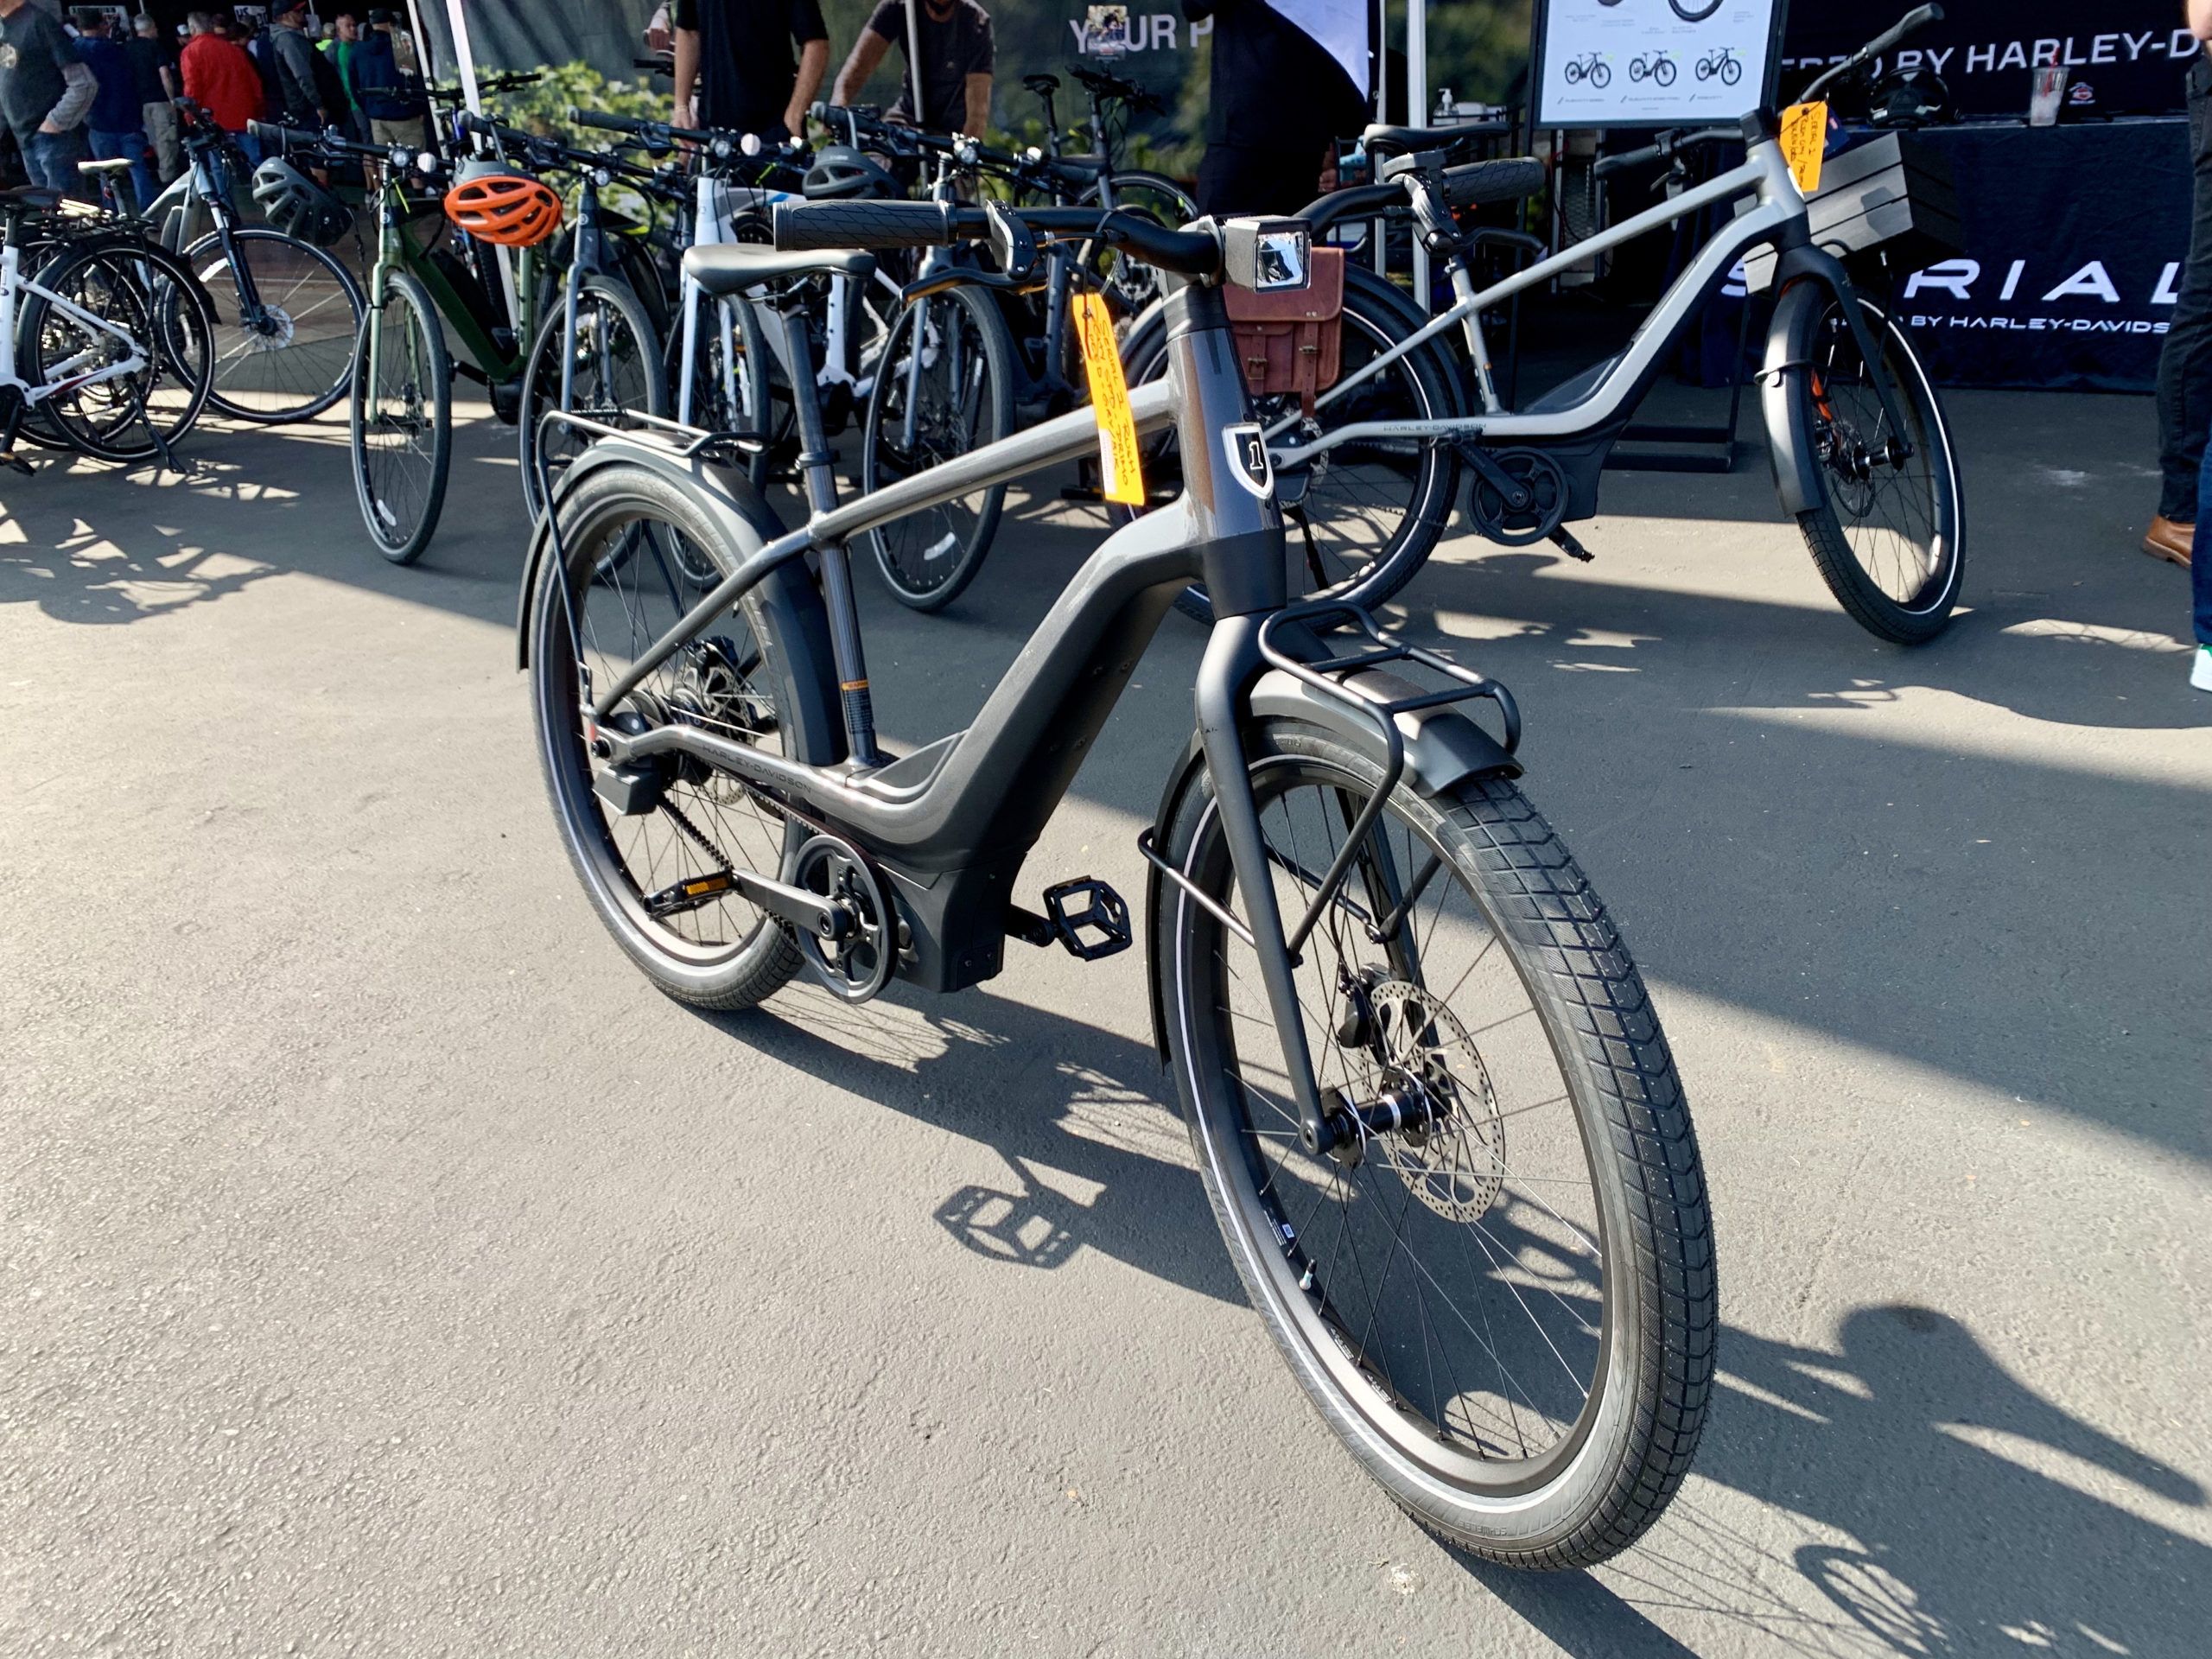 Harley Davidson Serial 1 ebike parked outdoors for IMS 2021